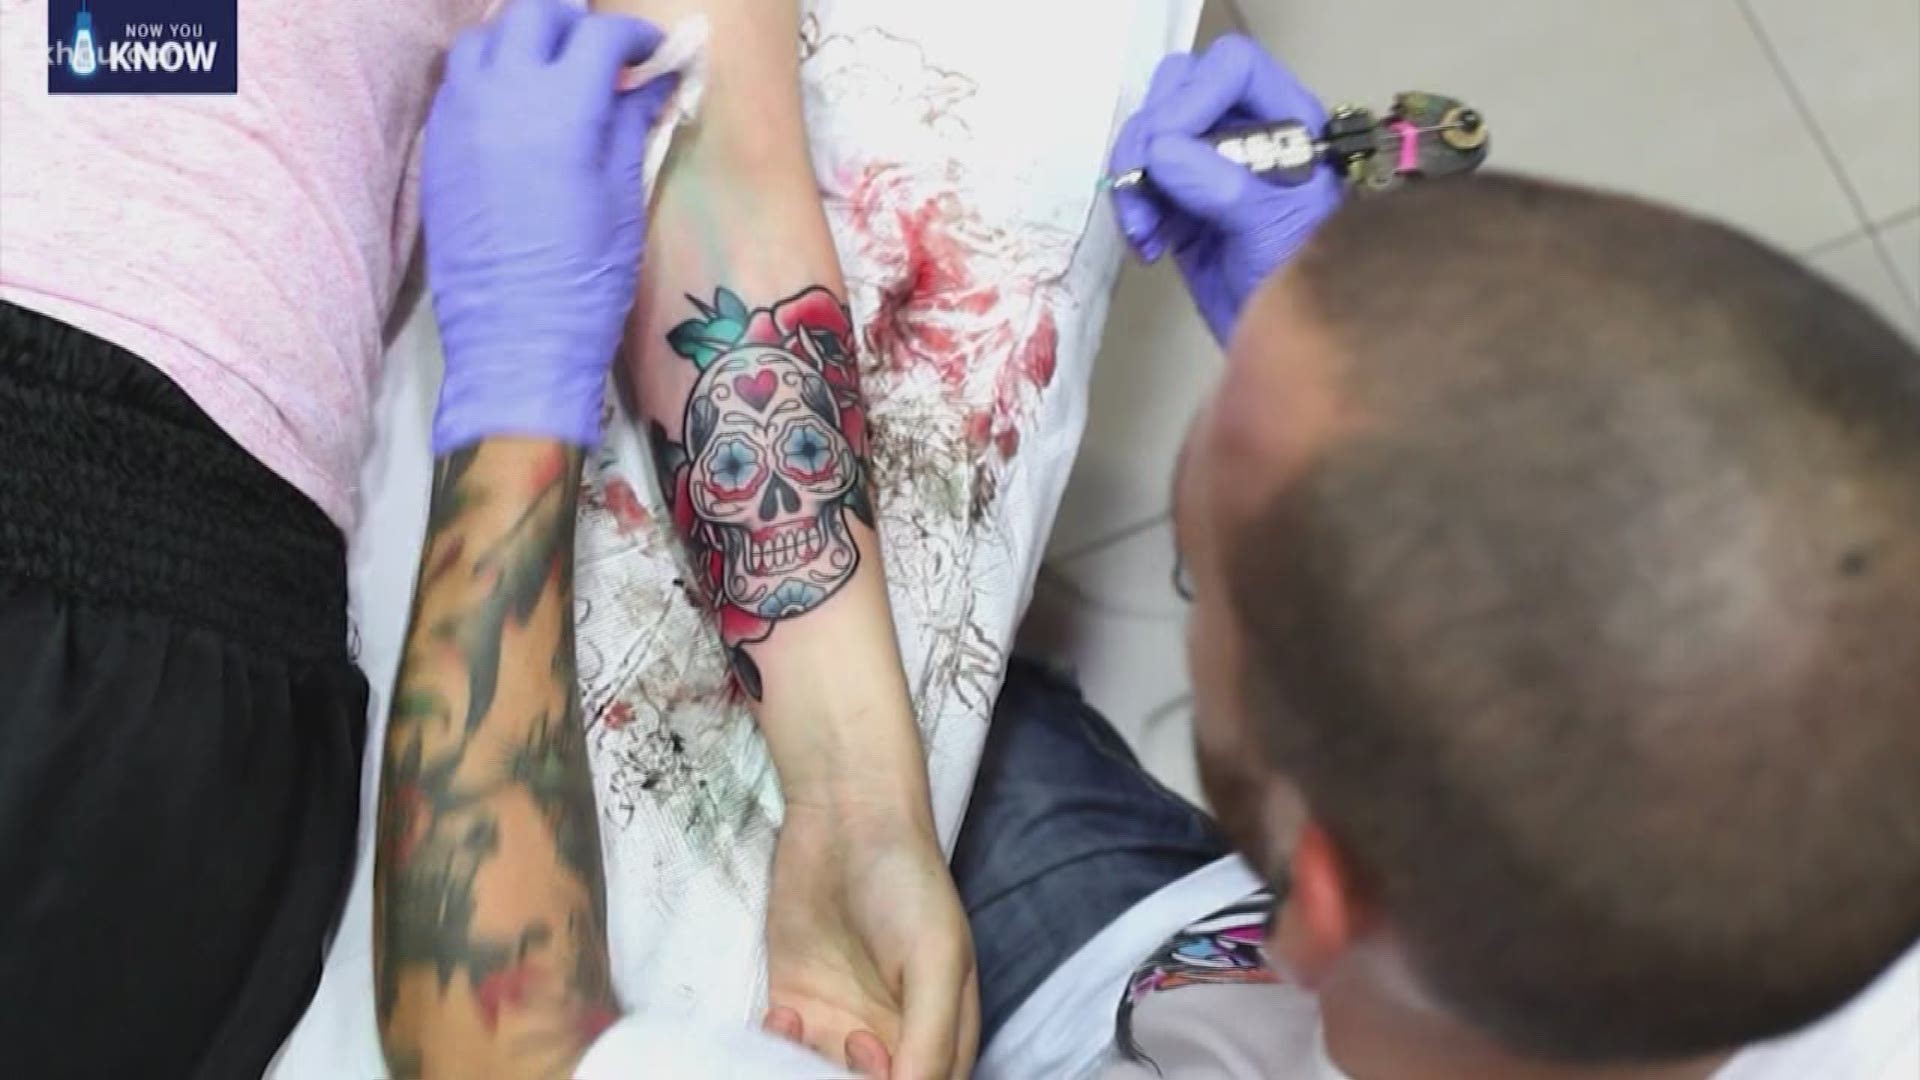 An inside look at the business of tattoo removal.